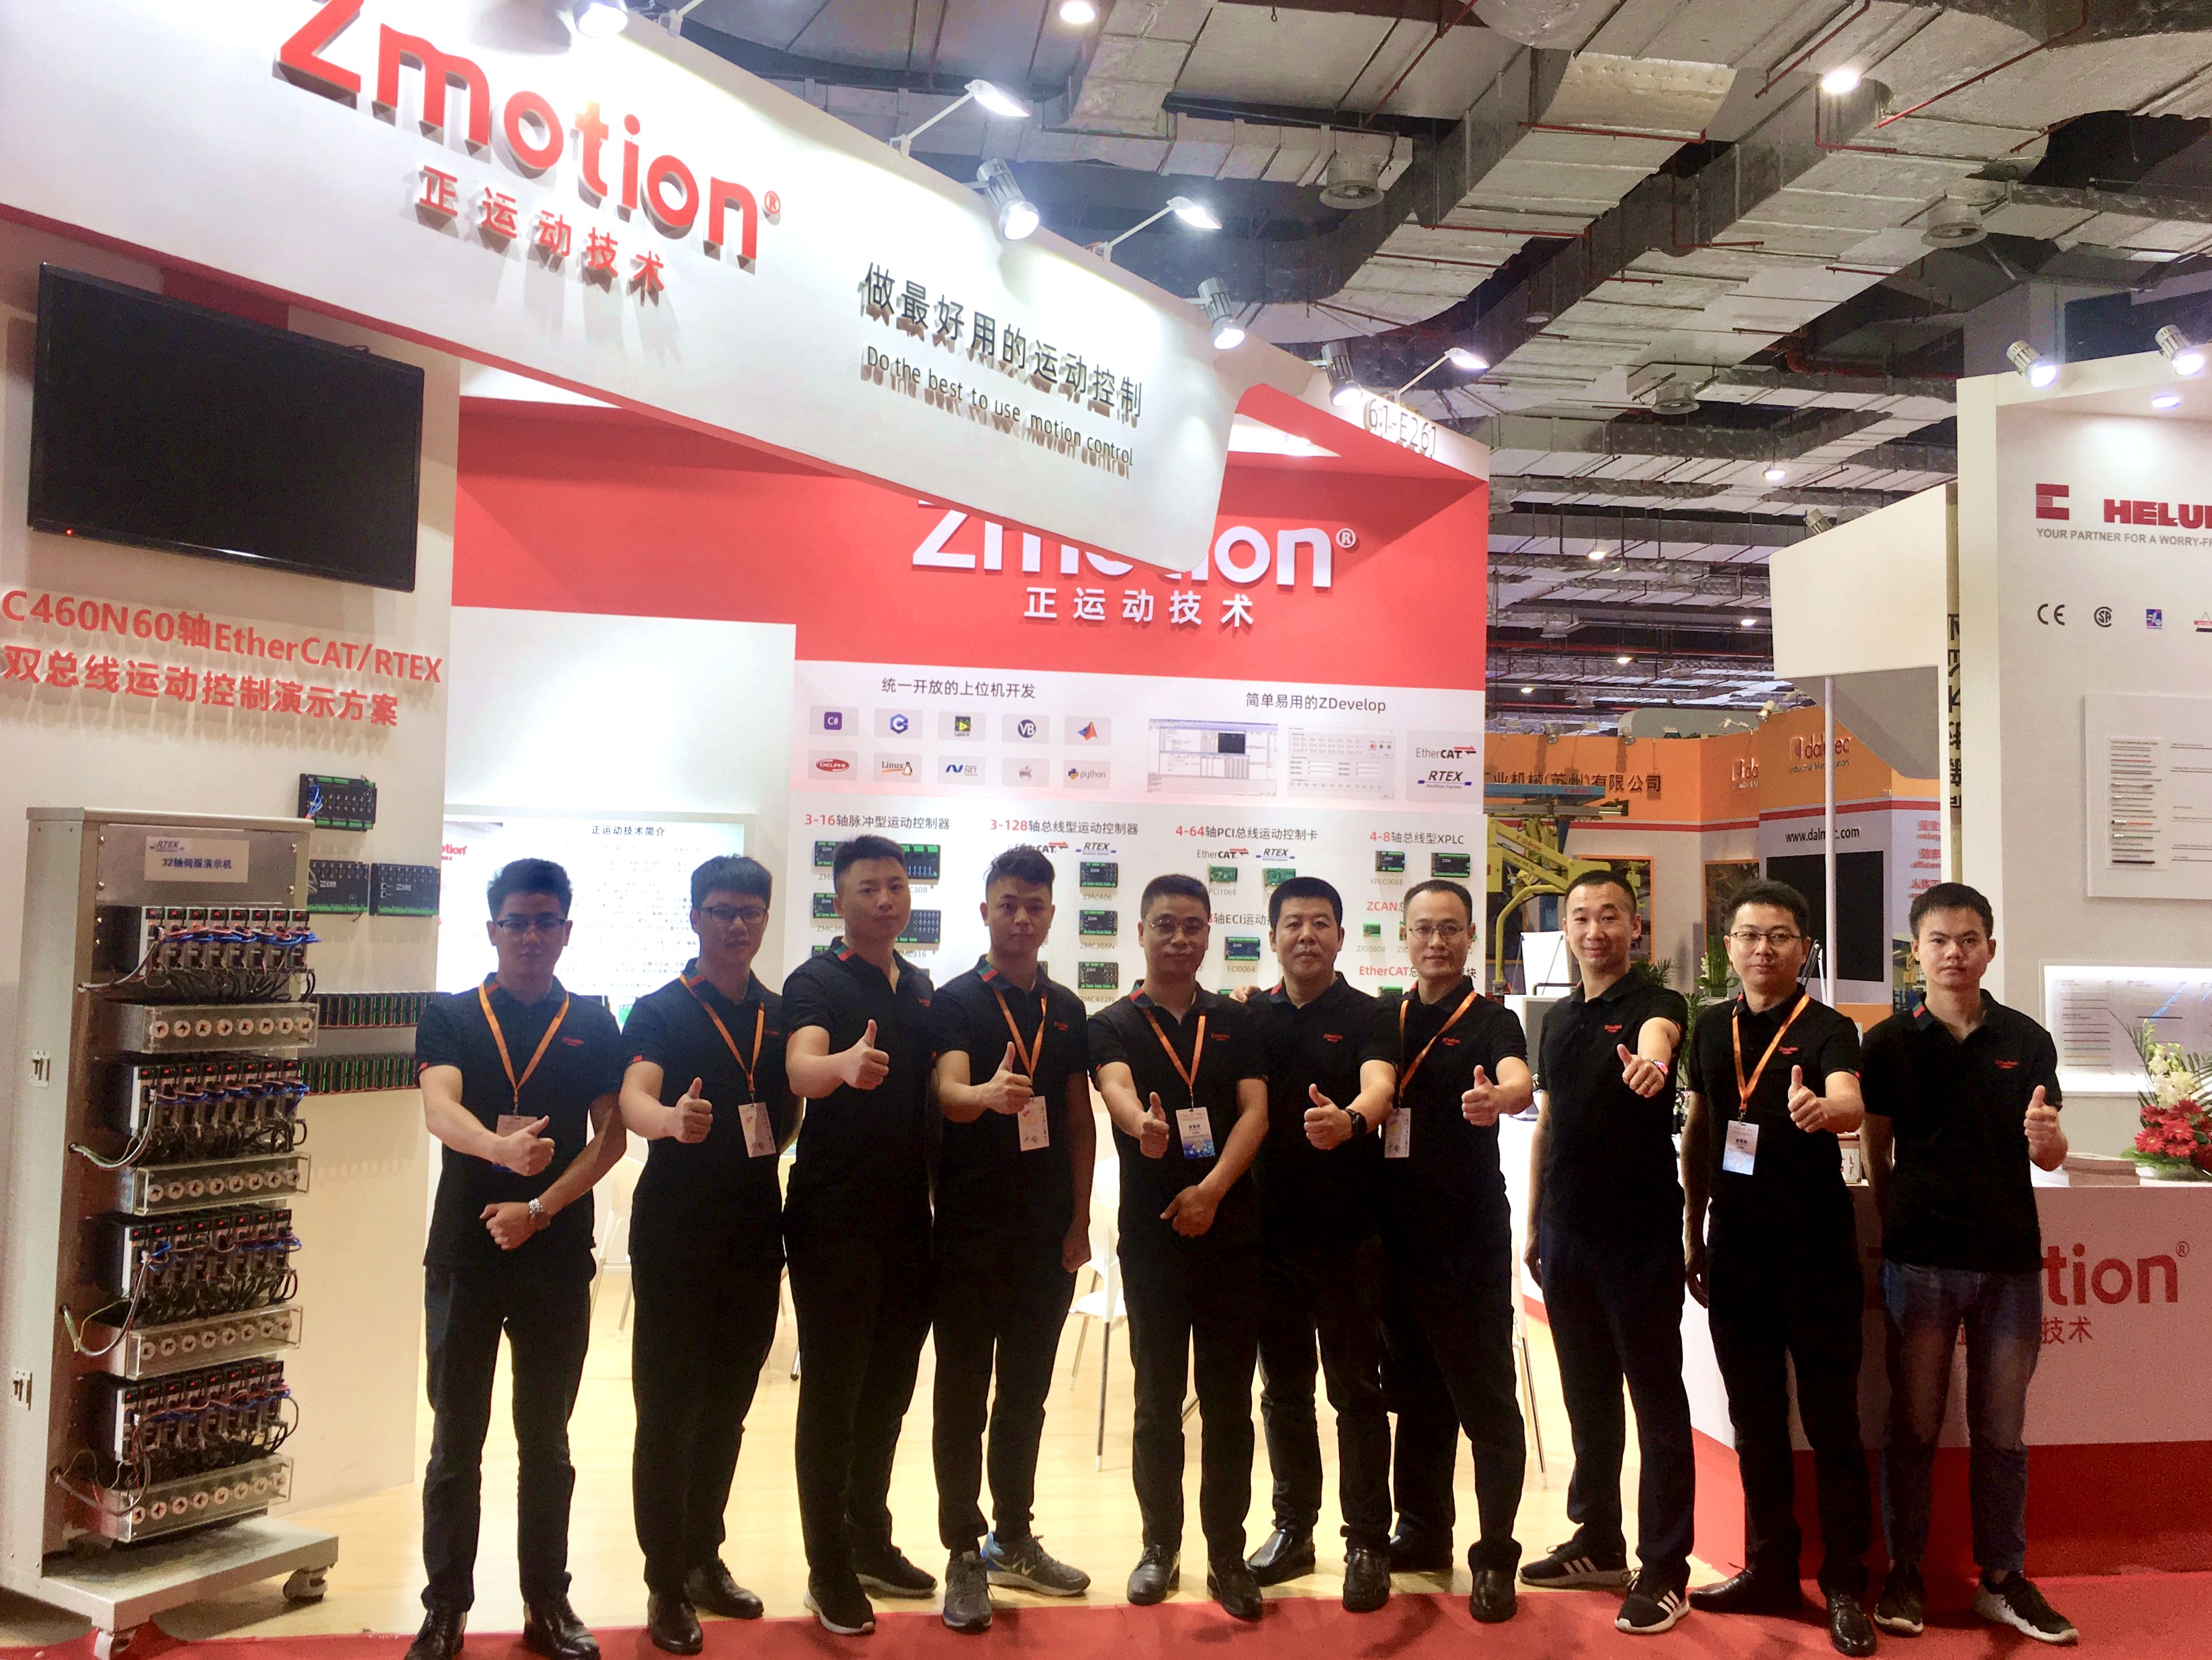 Zmotion in CIIF2019